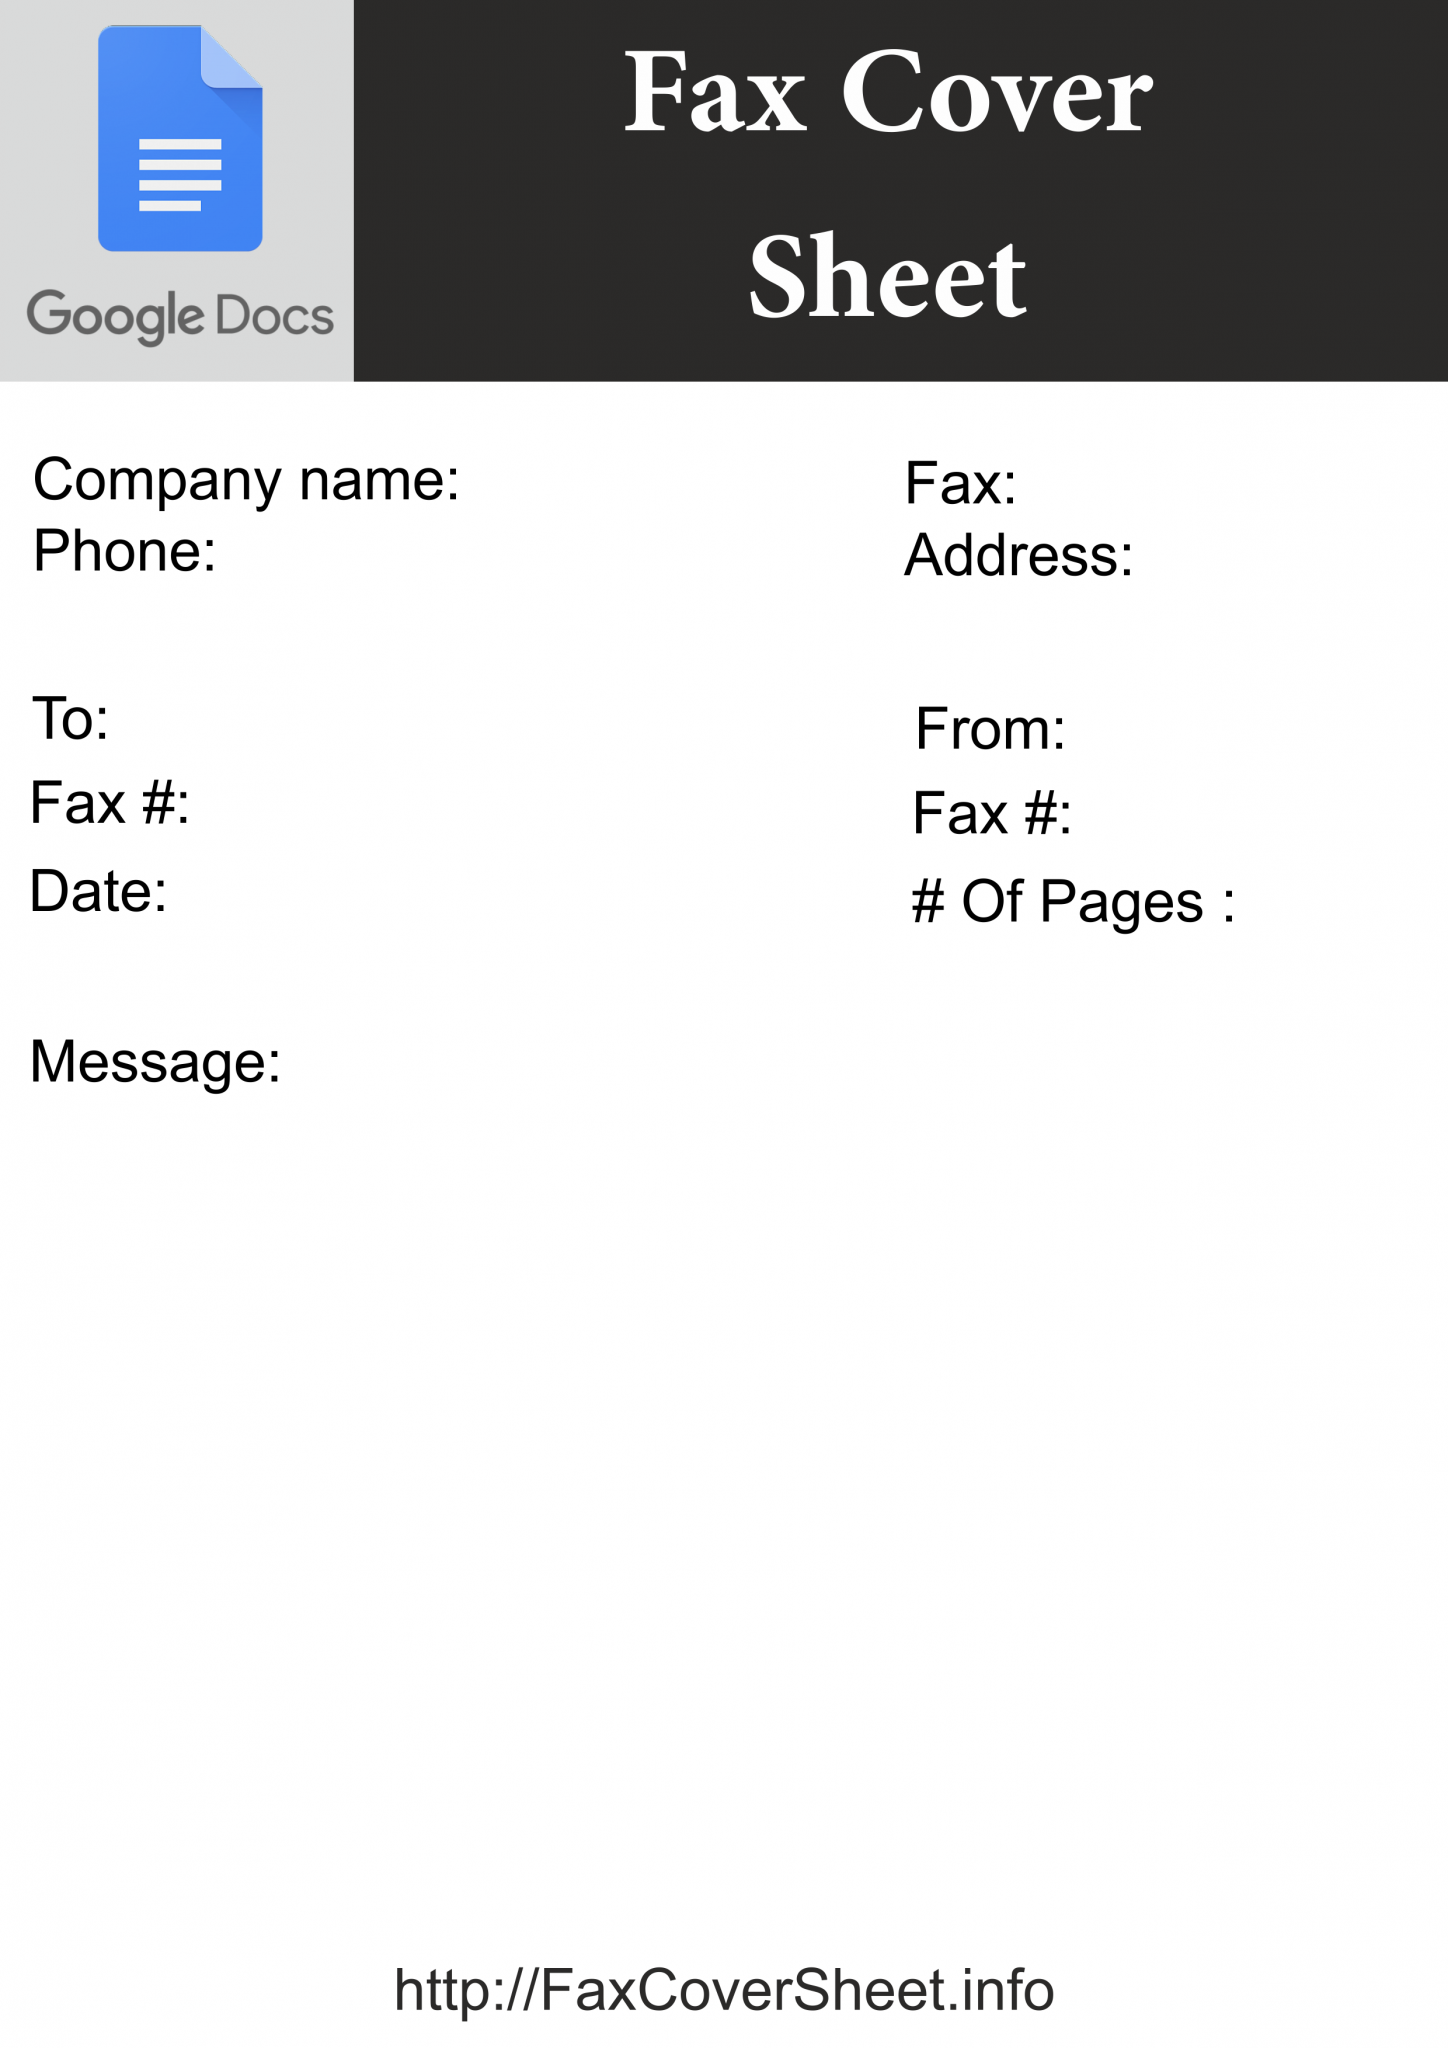 ready-to-use-google-docs-fax-cover-sheet